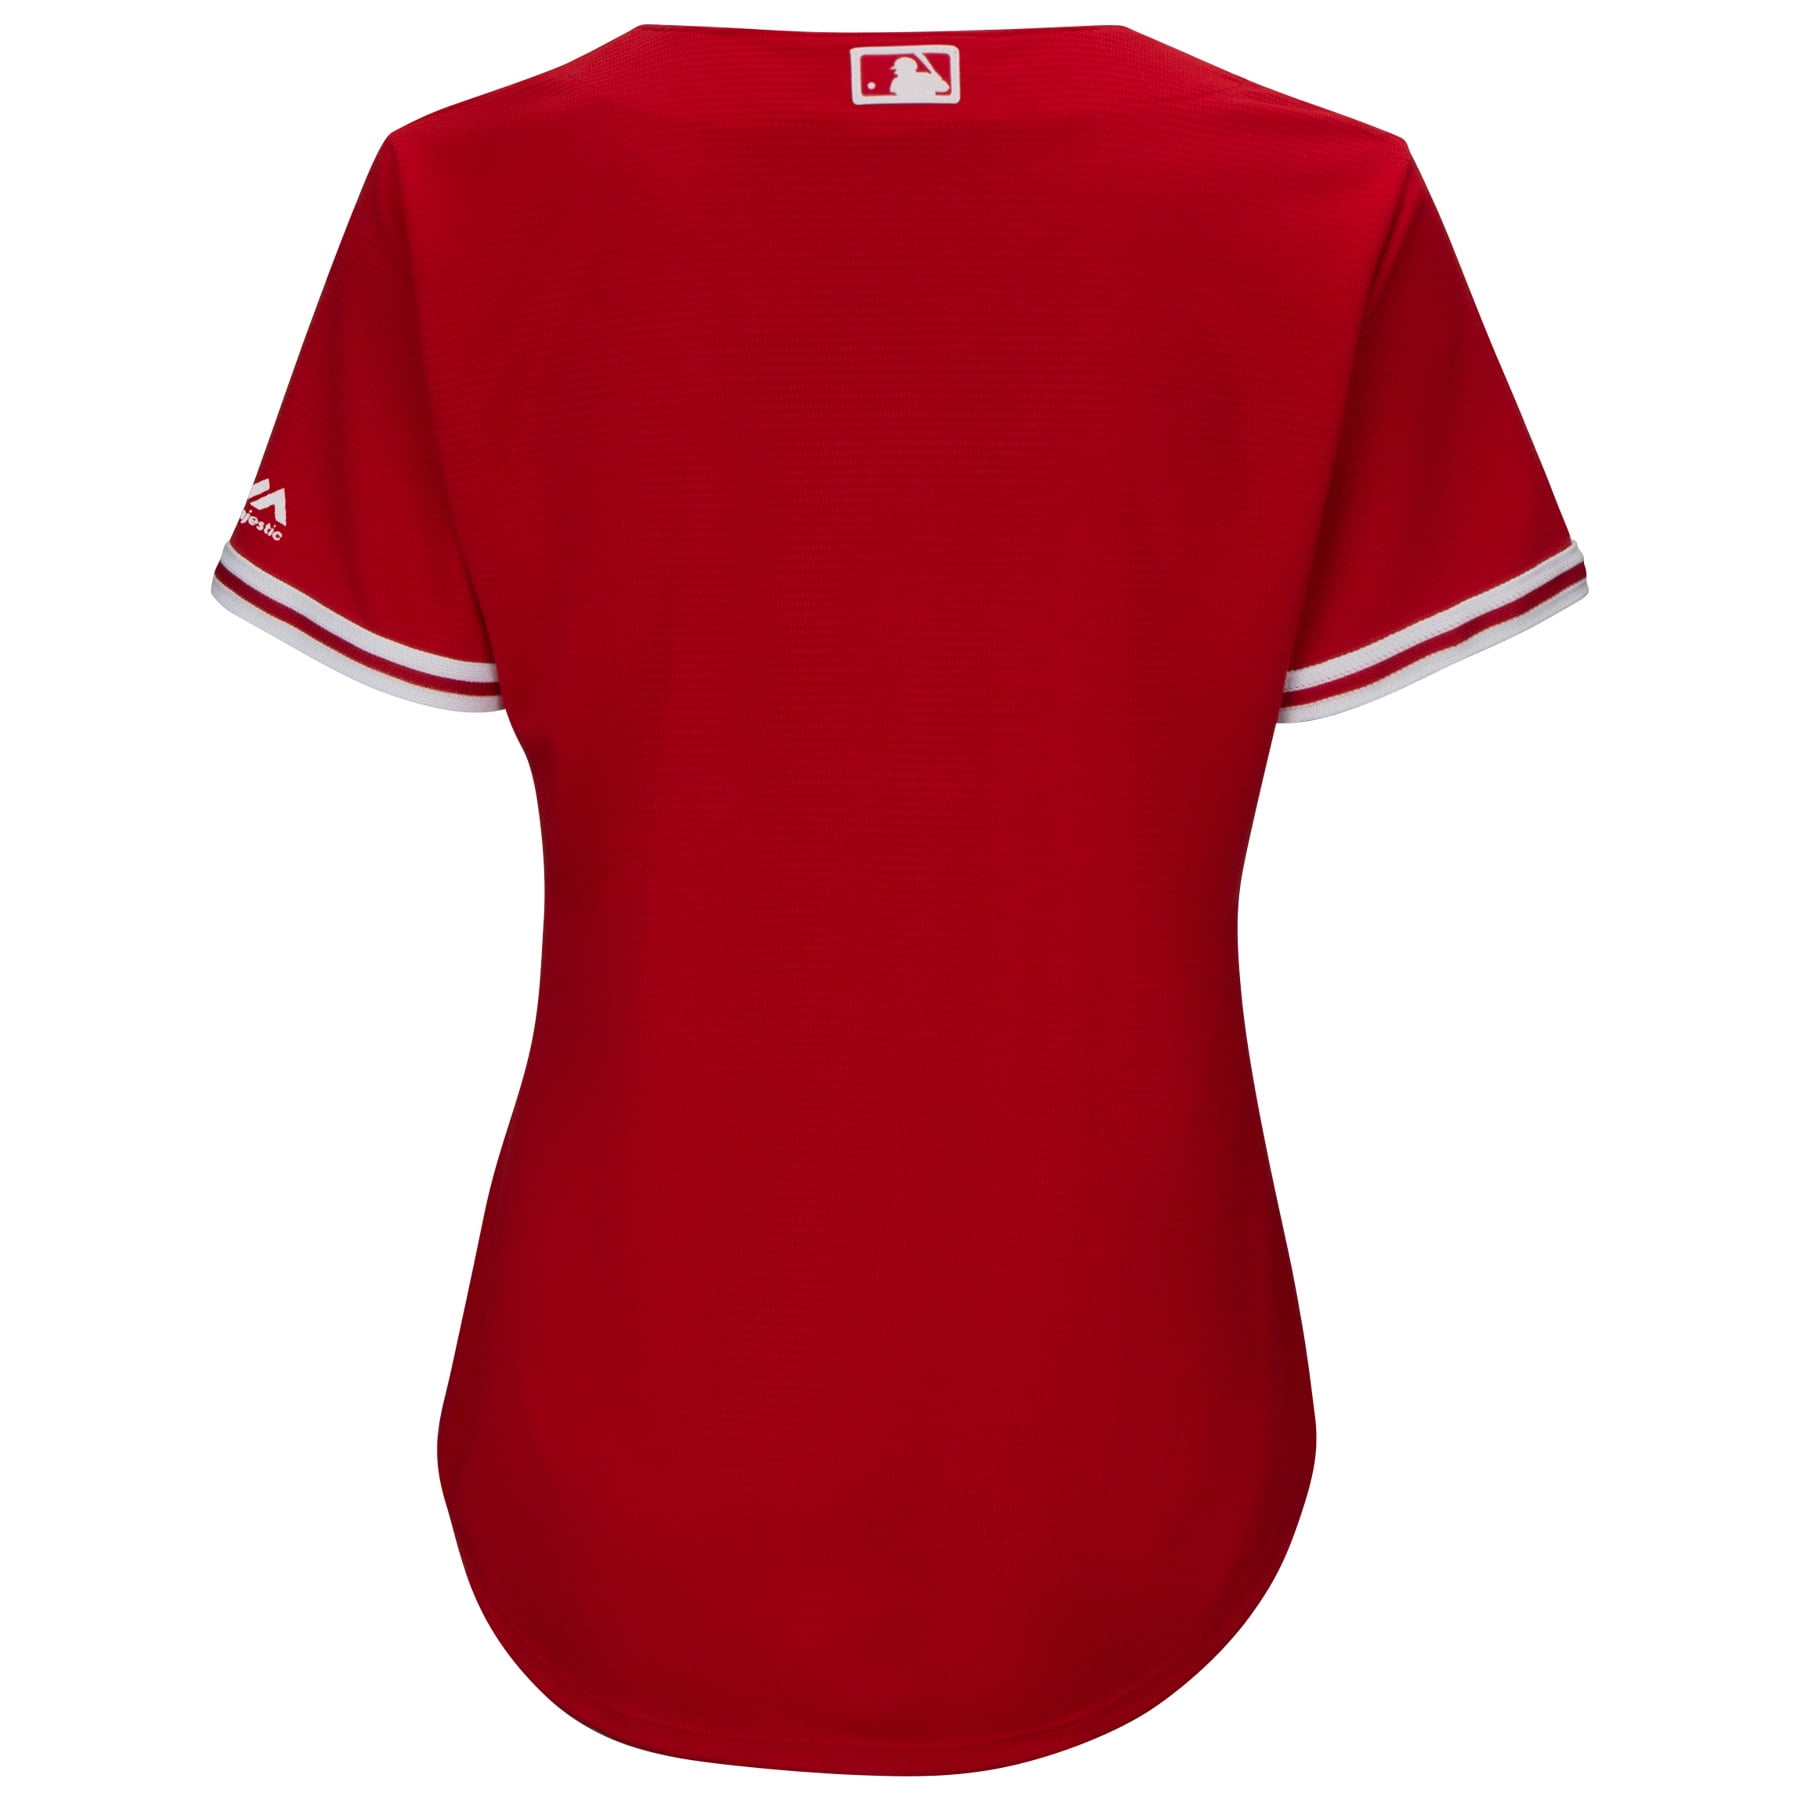 blue jays red replica jersey